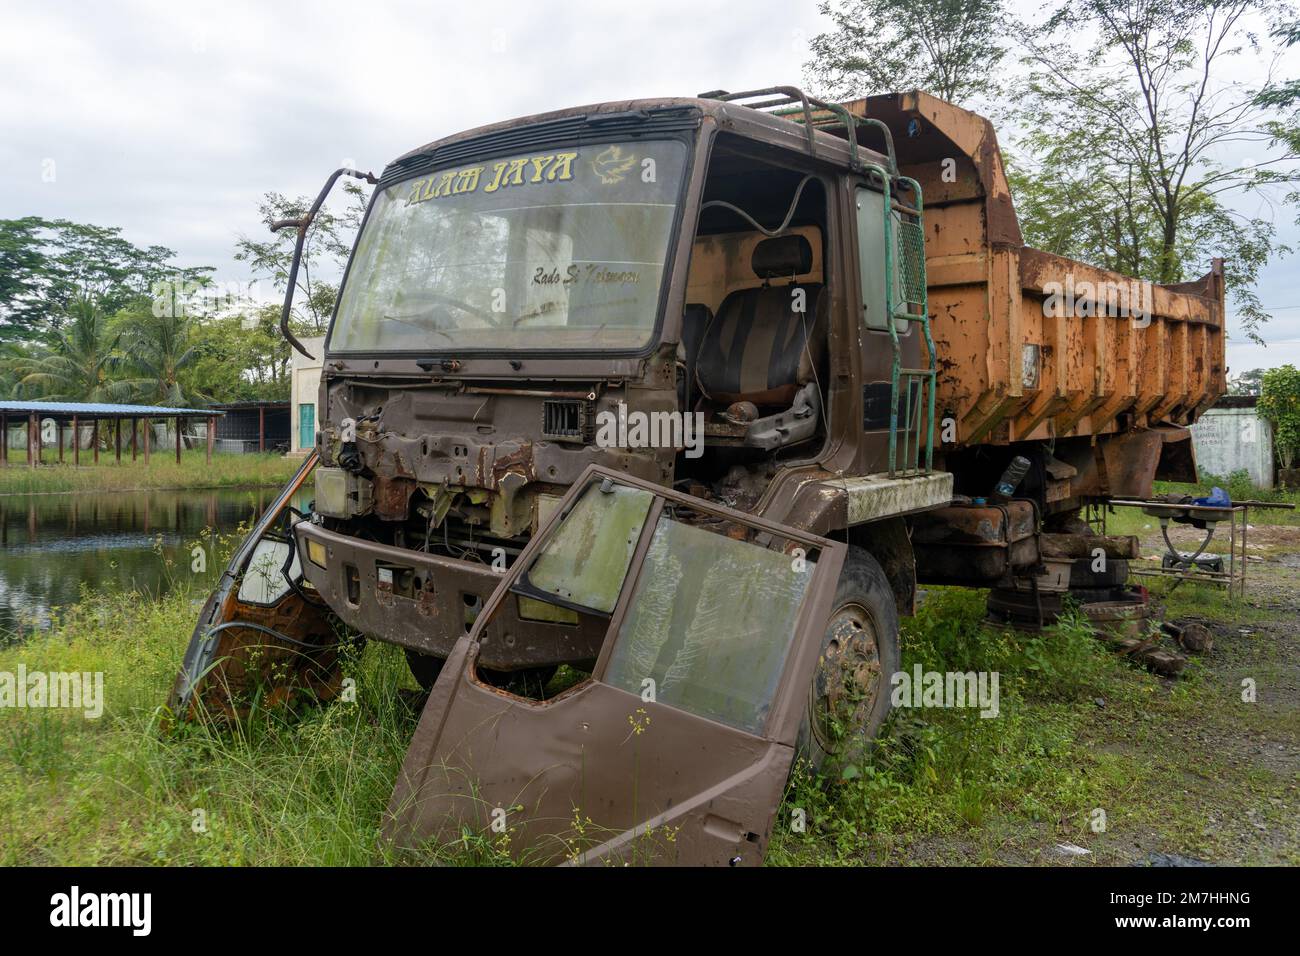 Abandoned broken trucks in the middle of nature covered in wild bushes close up Stock Photo